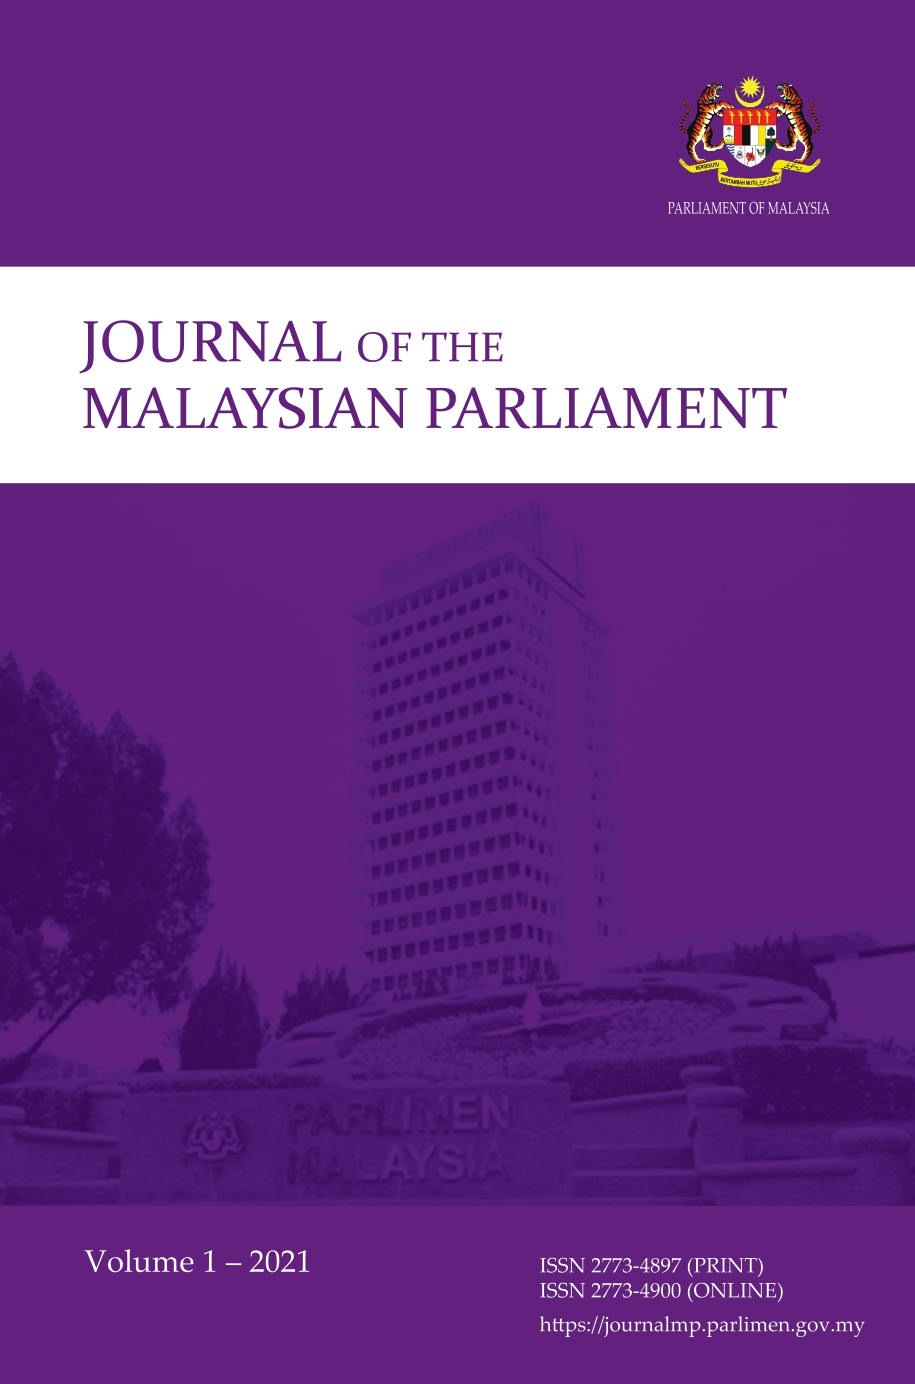 					View Vol. 1 (2021): Journal of the Malaysian Parliament
				